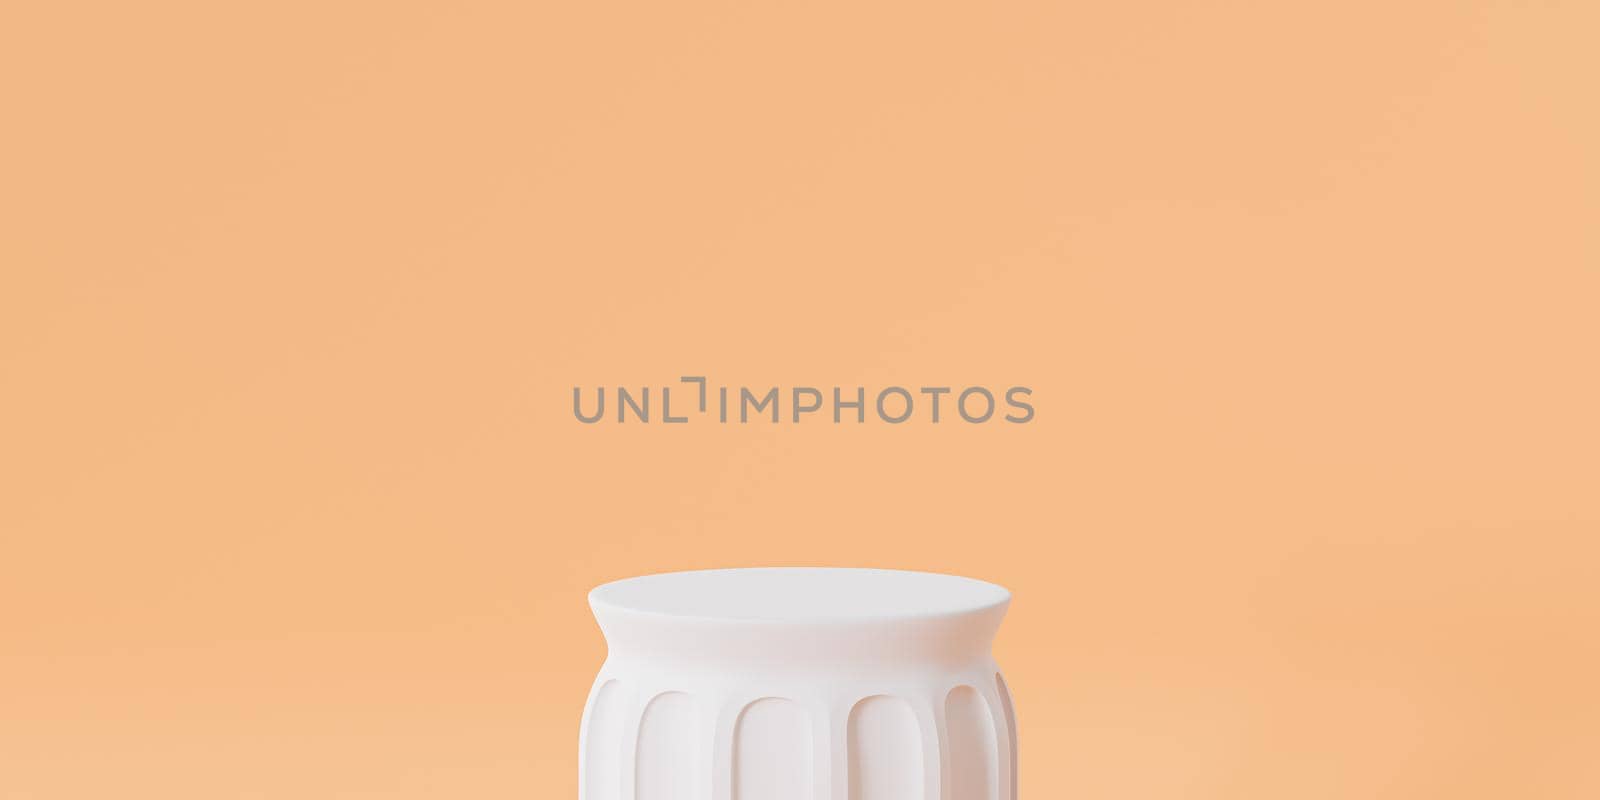 White pillar podium or pedestal for products or advertising on pastel orange banner background with copy space, 3d render by Frostroomhead